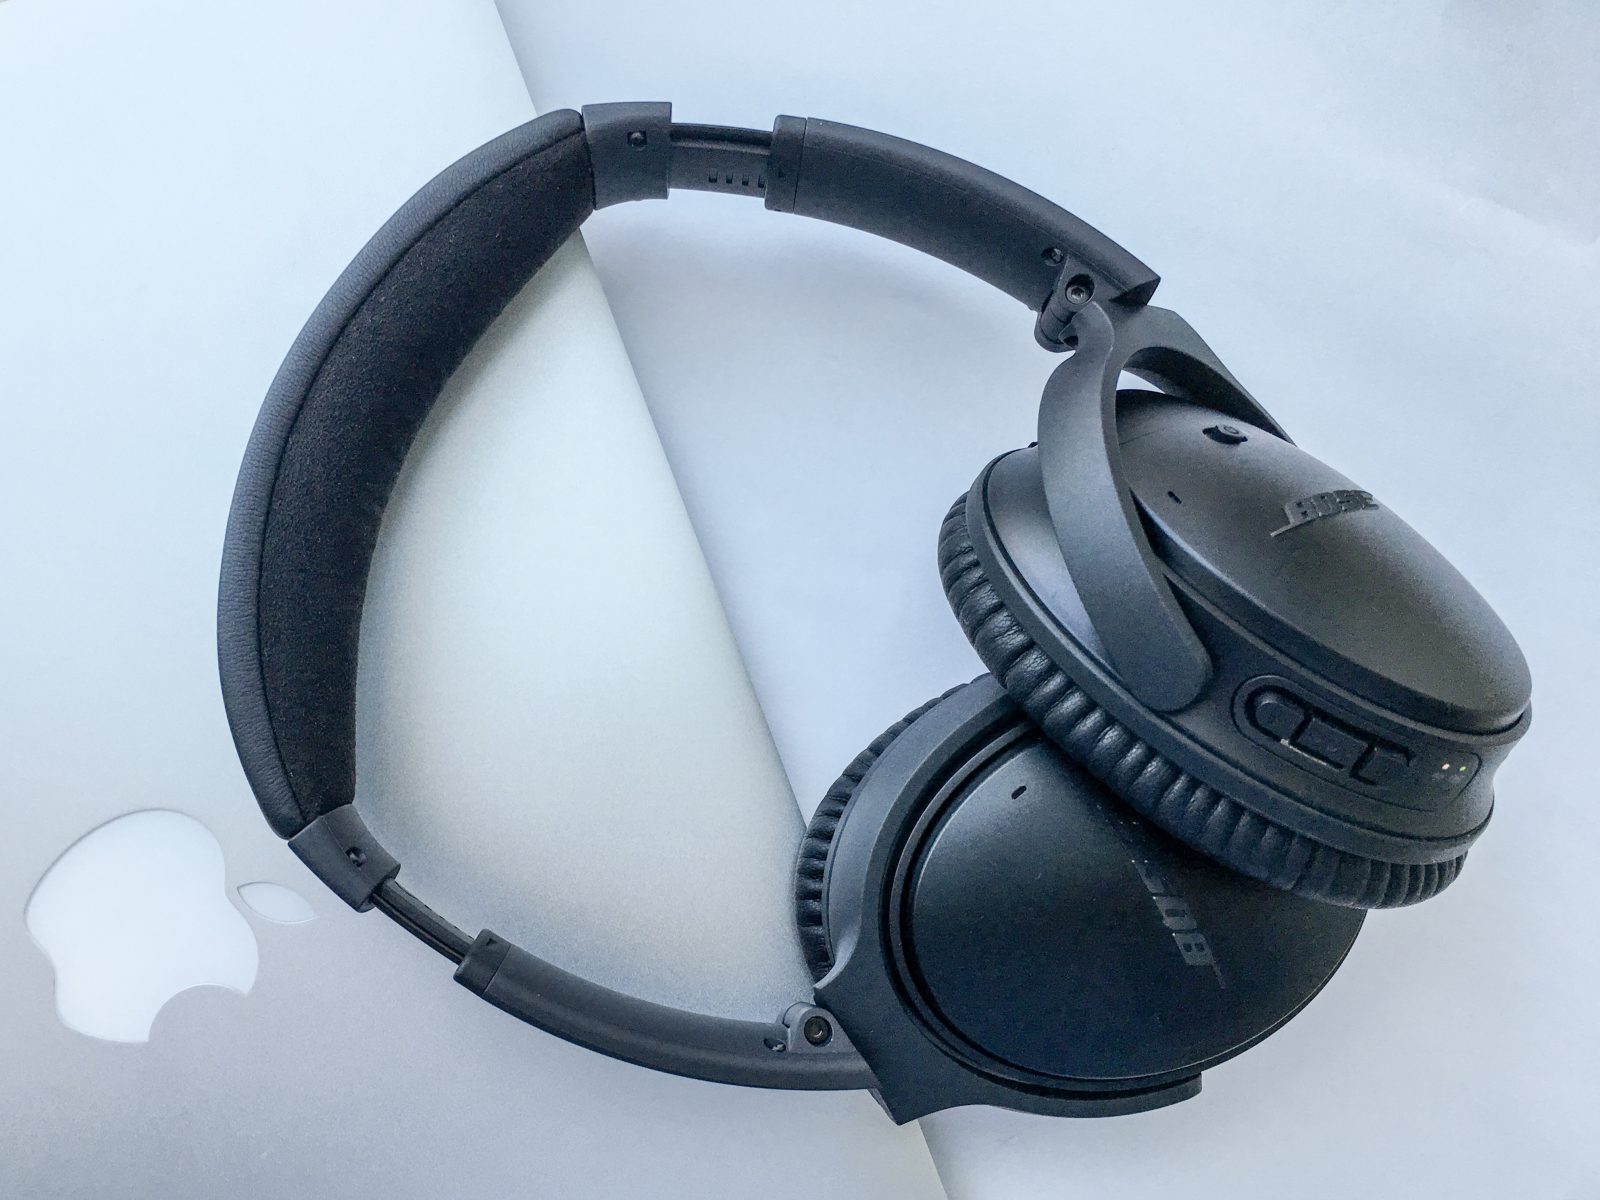 Review: QuietComfort - The "GETTING THINGS DONE" Headphone Headphonesty